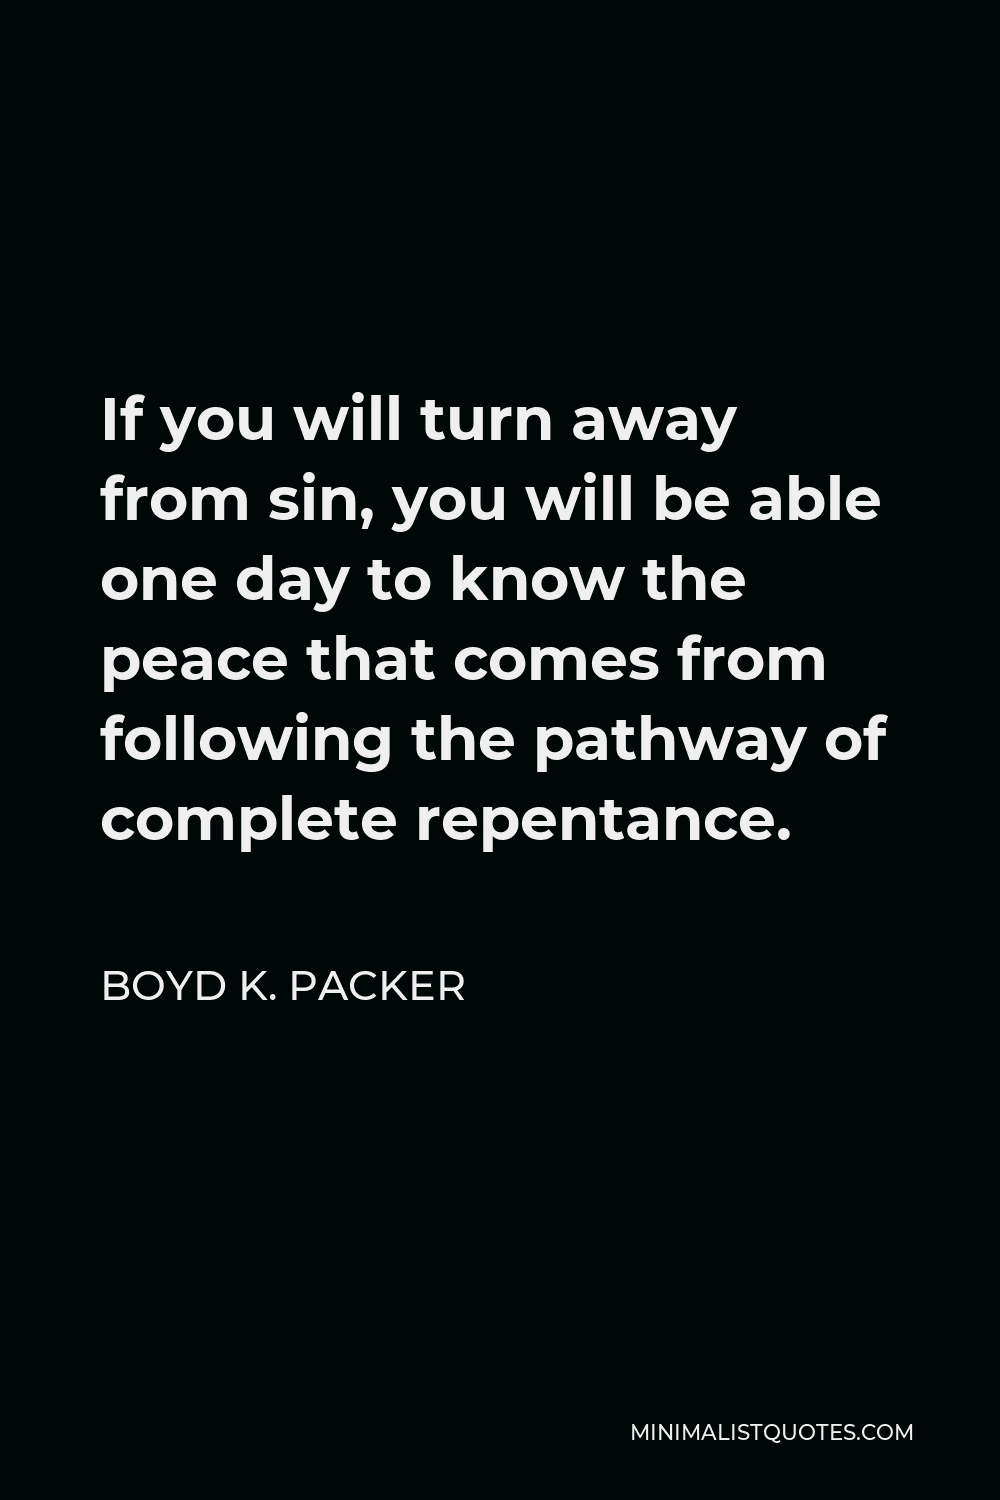 Boyd K. Packer Quote - If you will turn away from sin, you will be able one day to know the peace that comes from following the pathway of complete repentance.